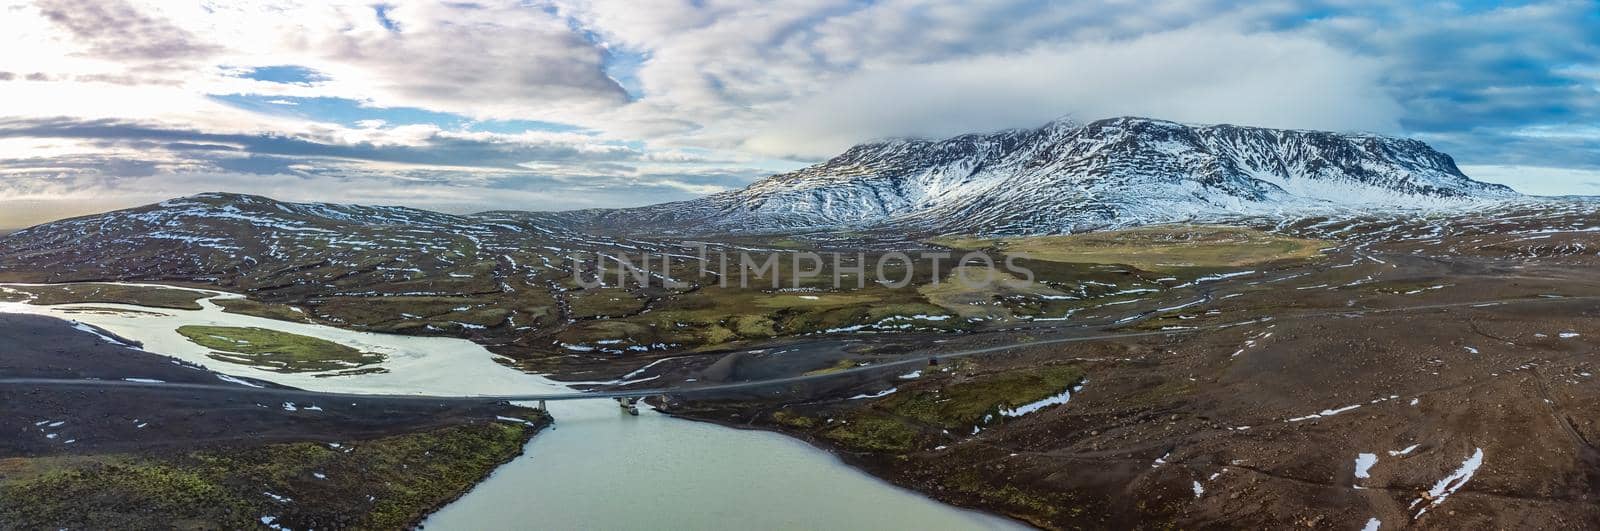 Huge panorama with bridge over the river and mountains with snow